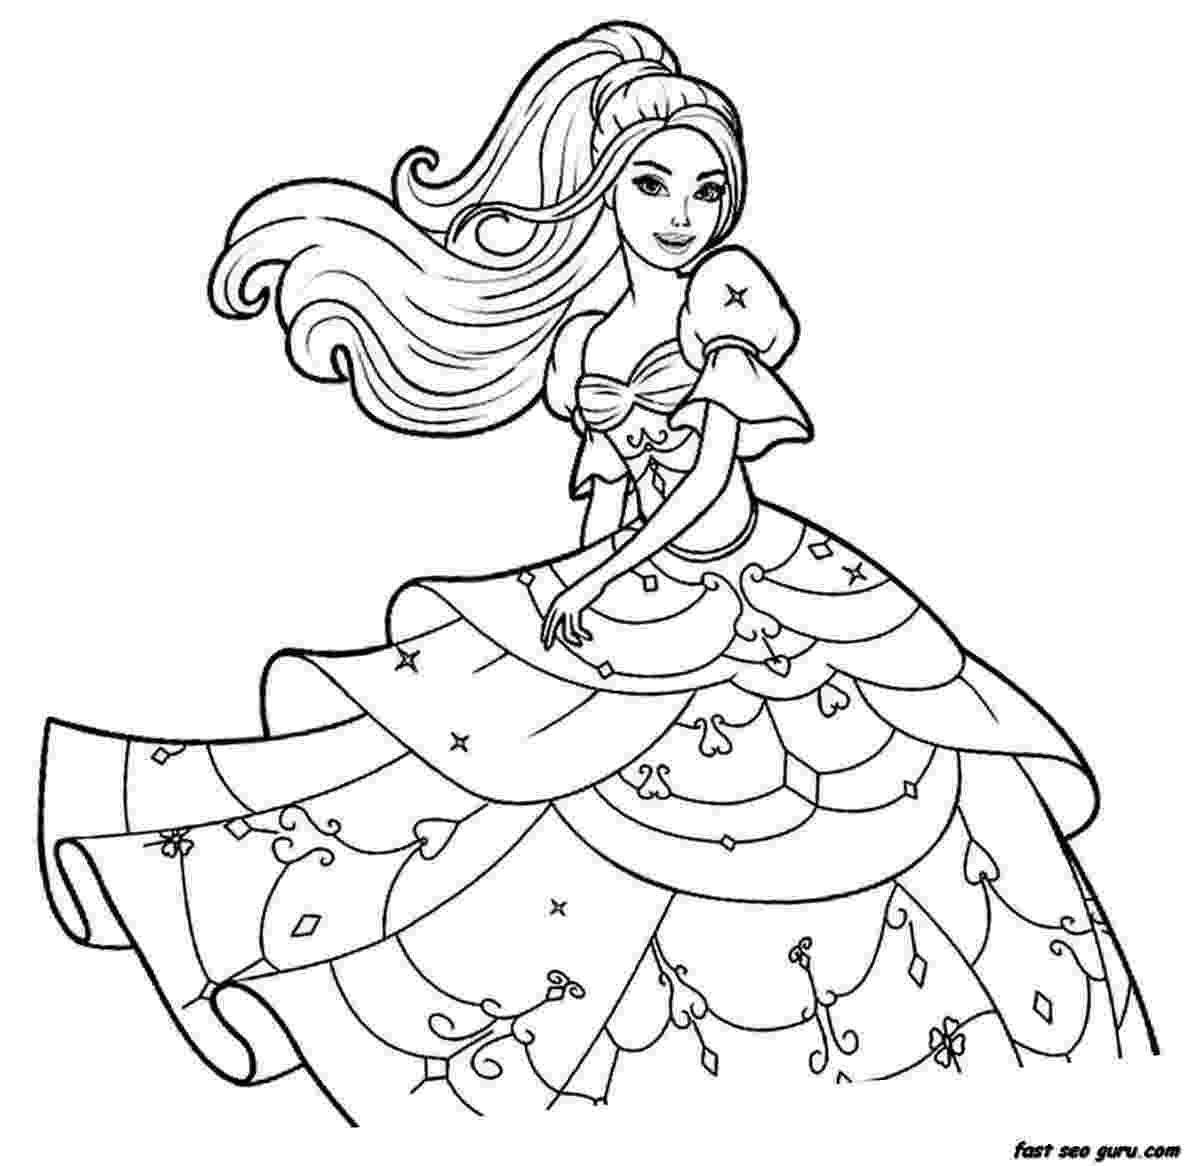 girl pictures to color and print cute girl coloring pages to download and print for free girl and pictures color to print 